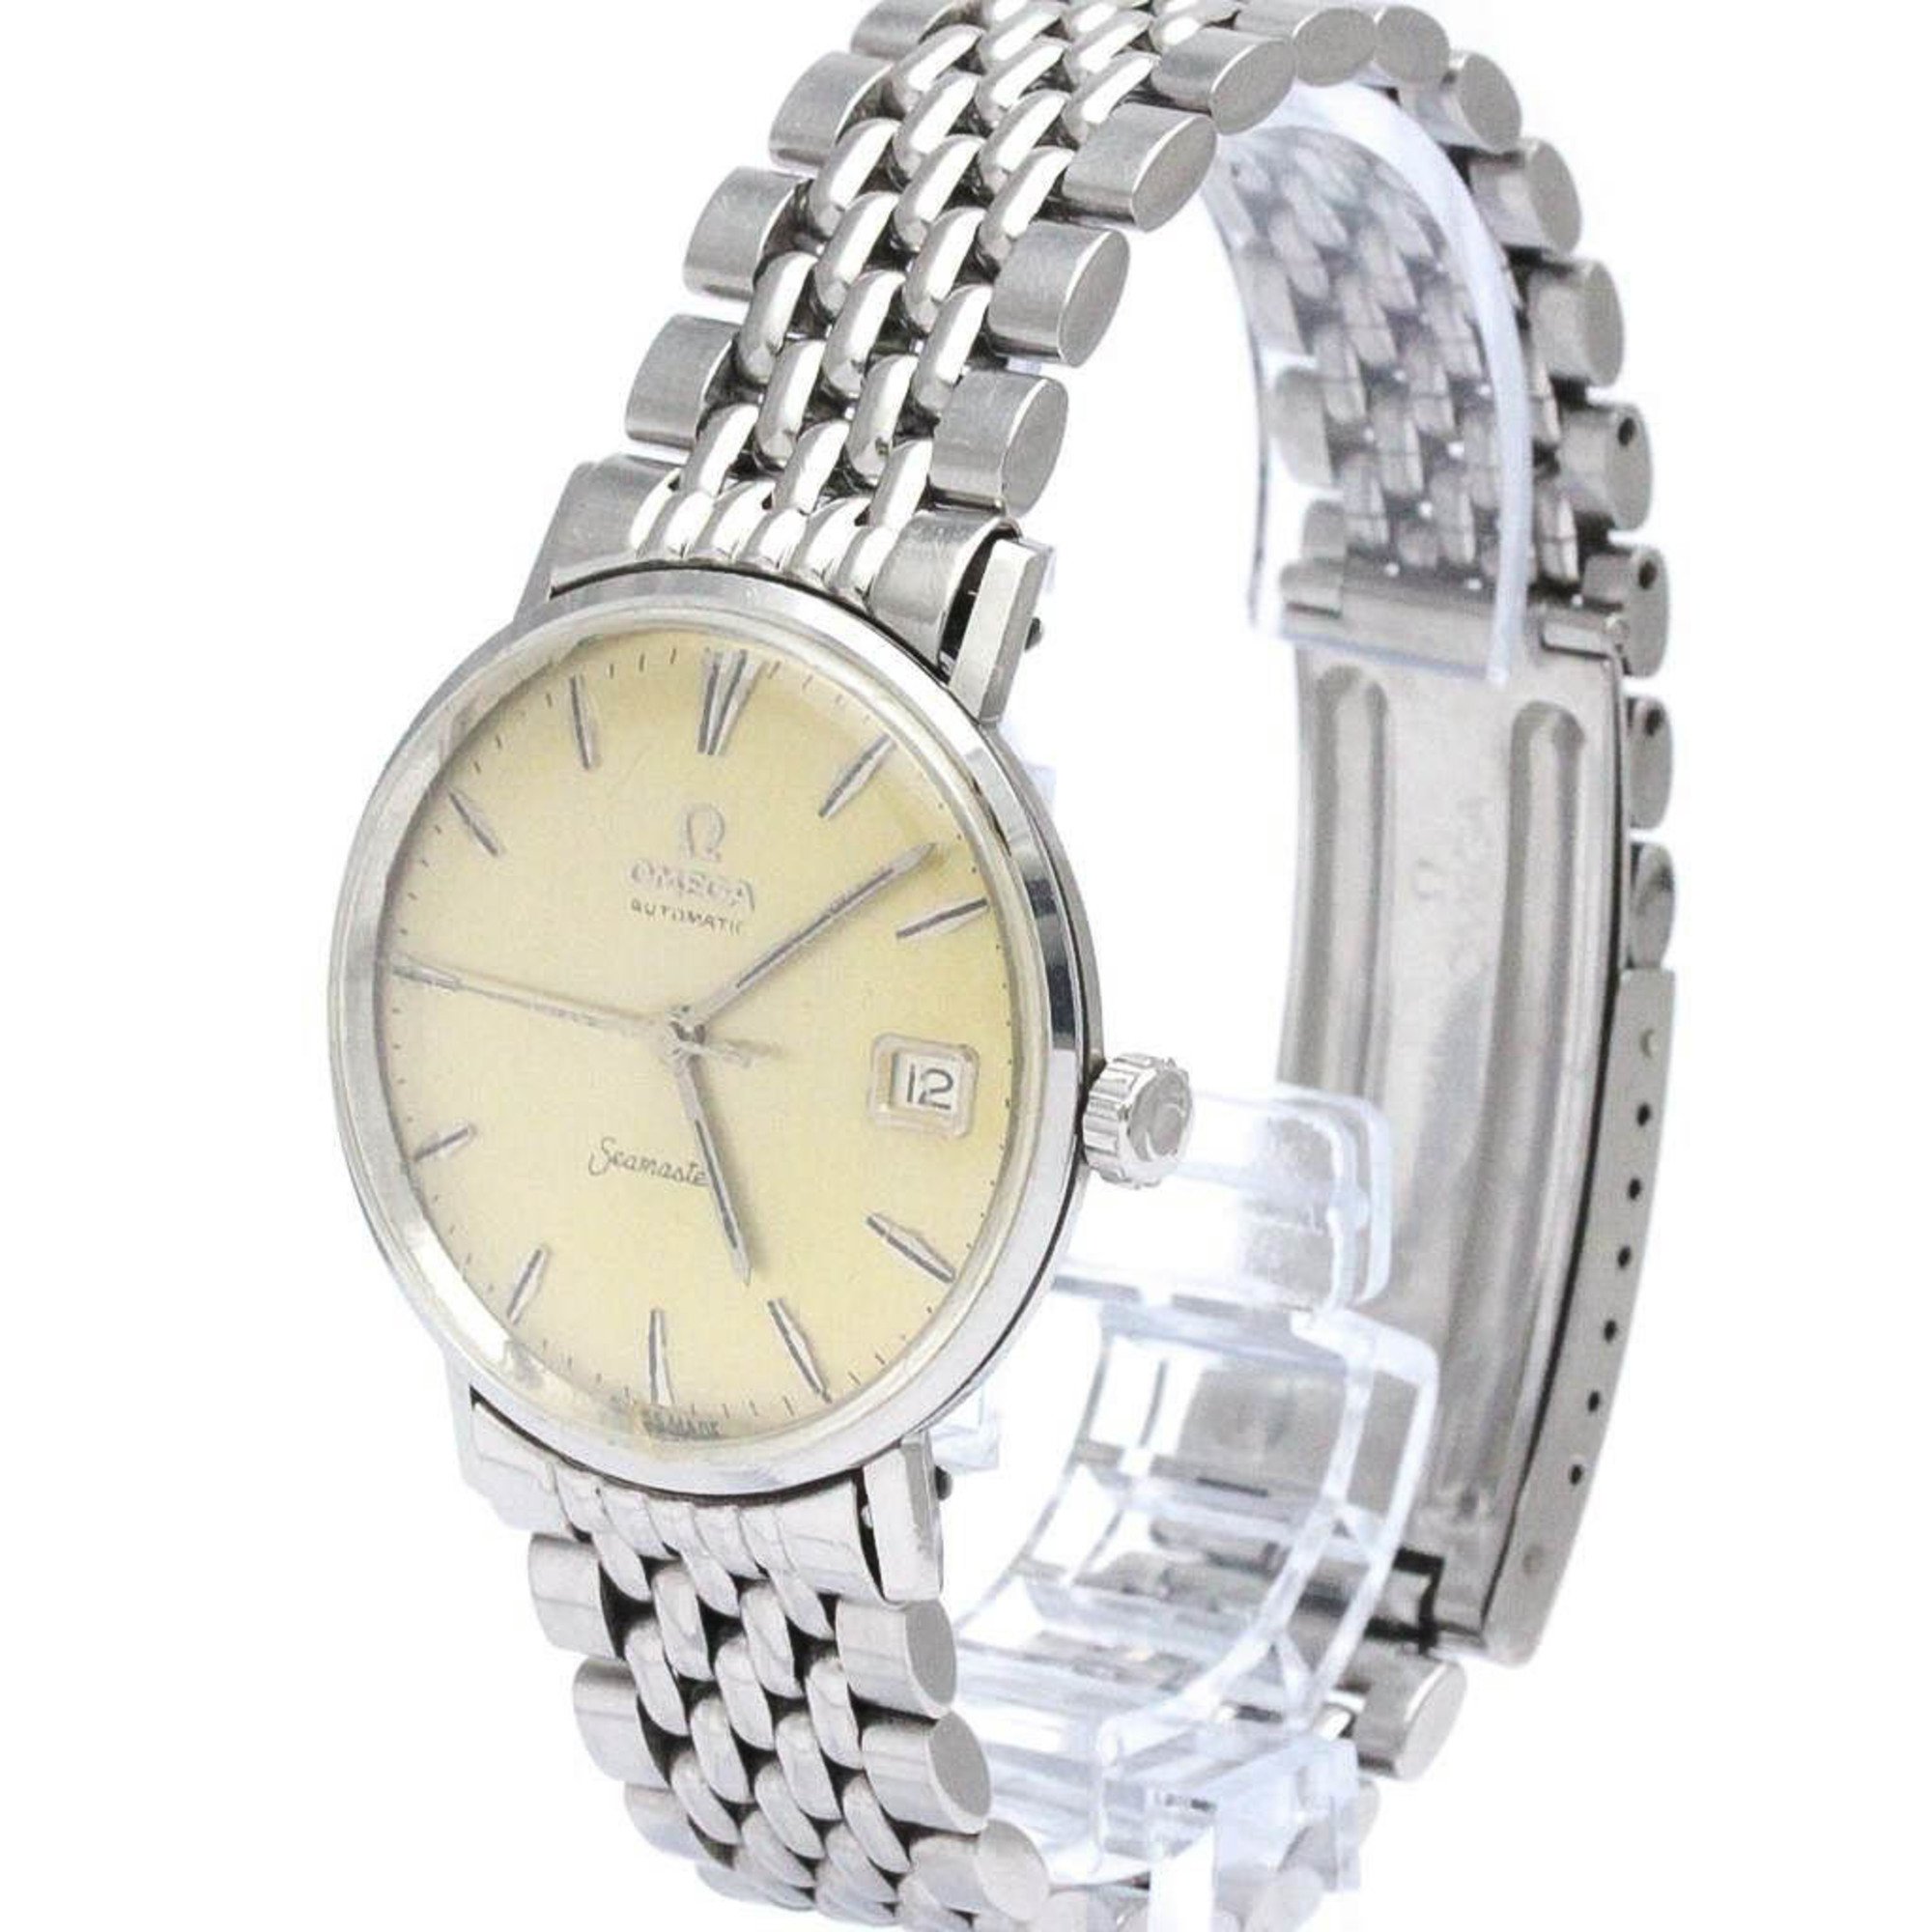 OMEGA Seamaster Cal 562 Rice Bracelet Automatic Steel Mens Watch BF565492